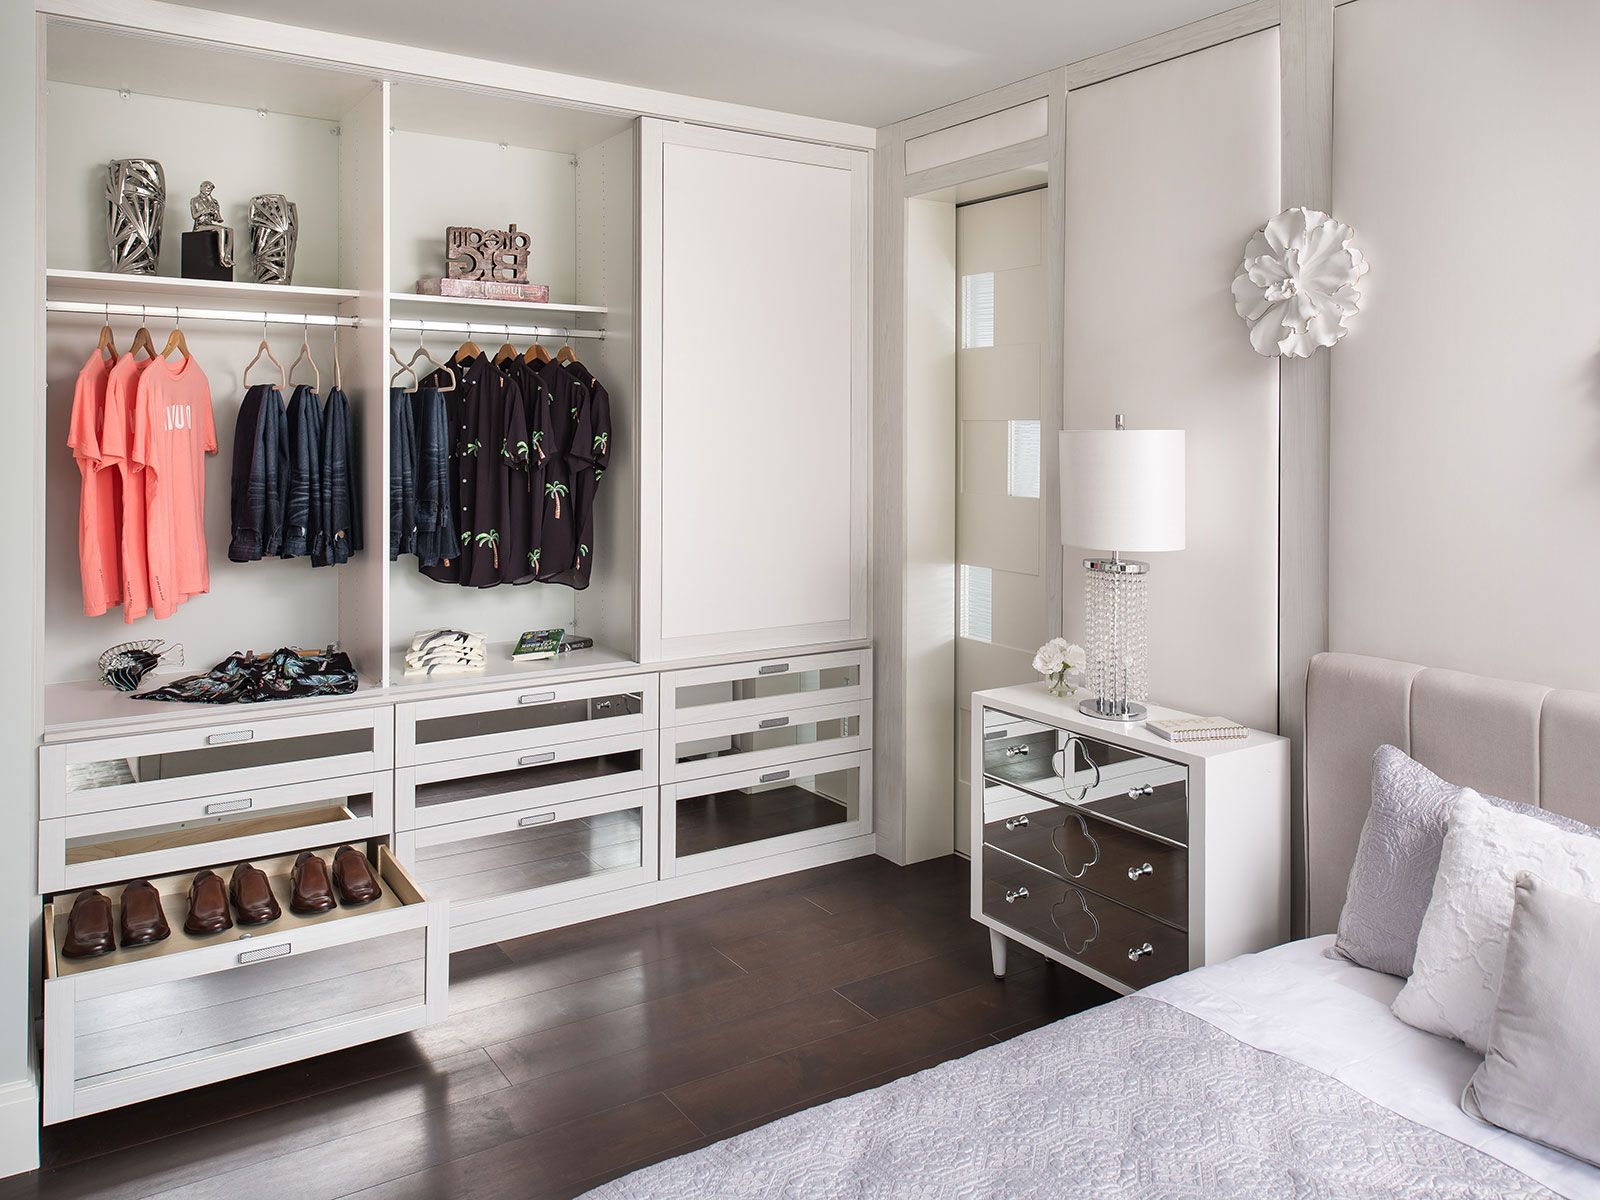 Wardrobe Closets | Design And Planning Ideas | Closet Factory Within Bedroom Wardrobes (Gallery 15 of 20)